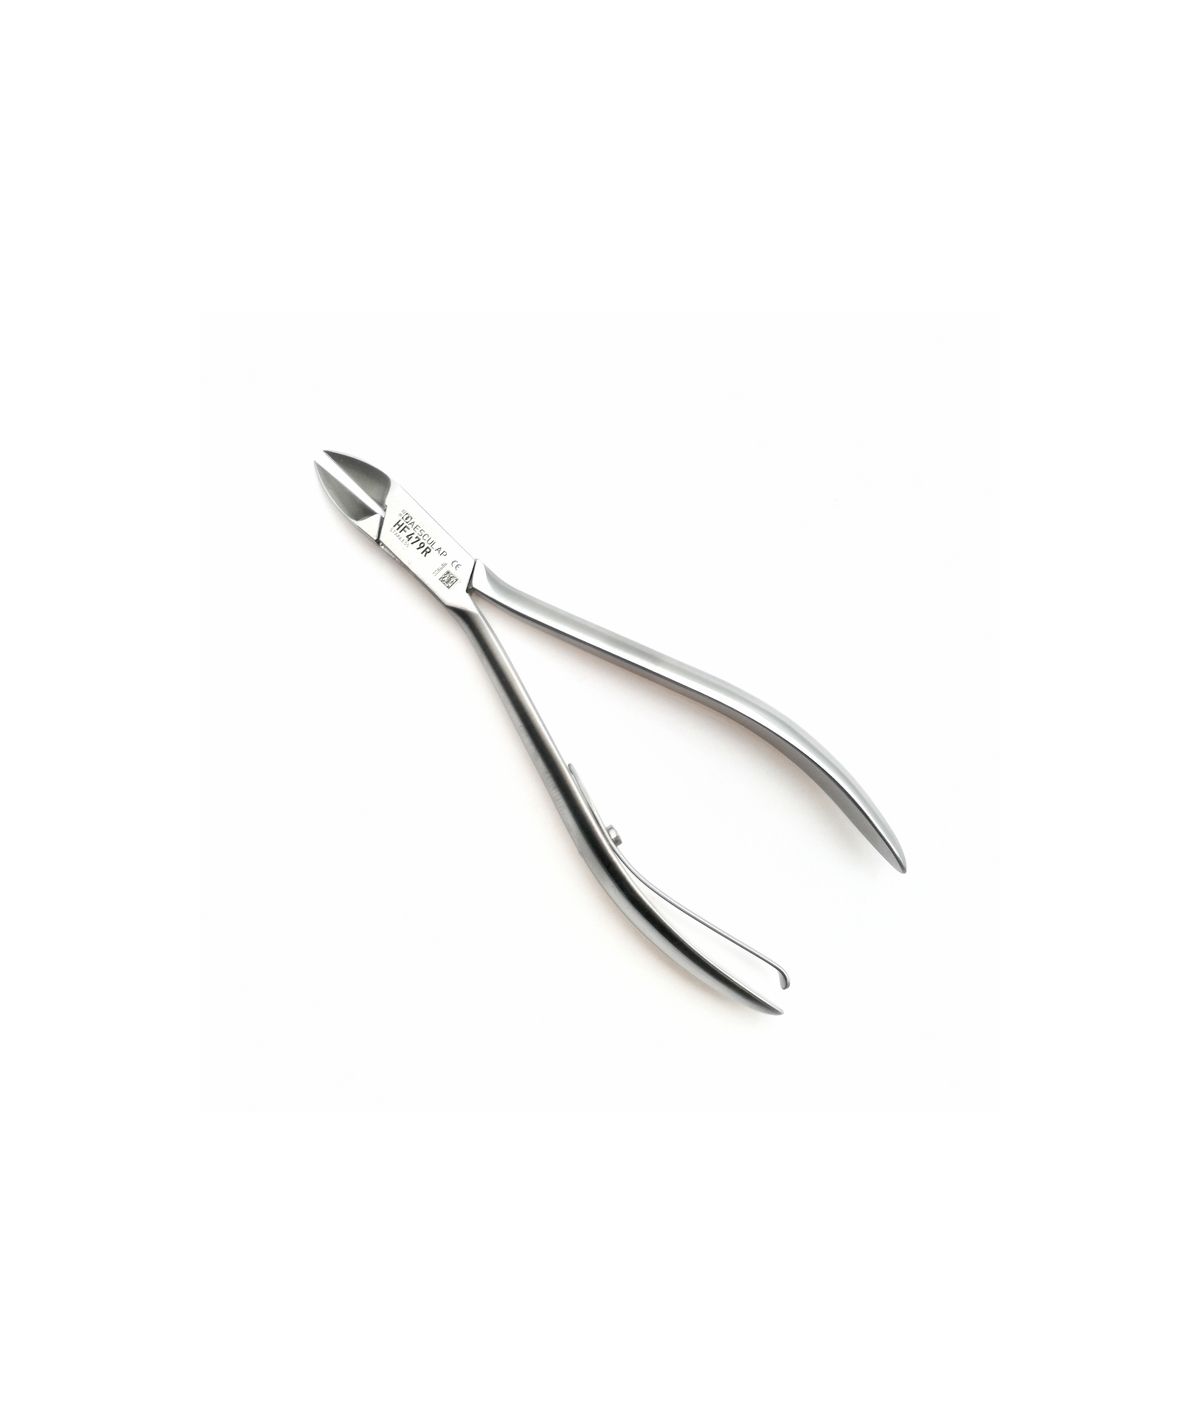 Pince à ongles incarnés inox - Mors fin - Taille 13 cm - Aesculap 479